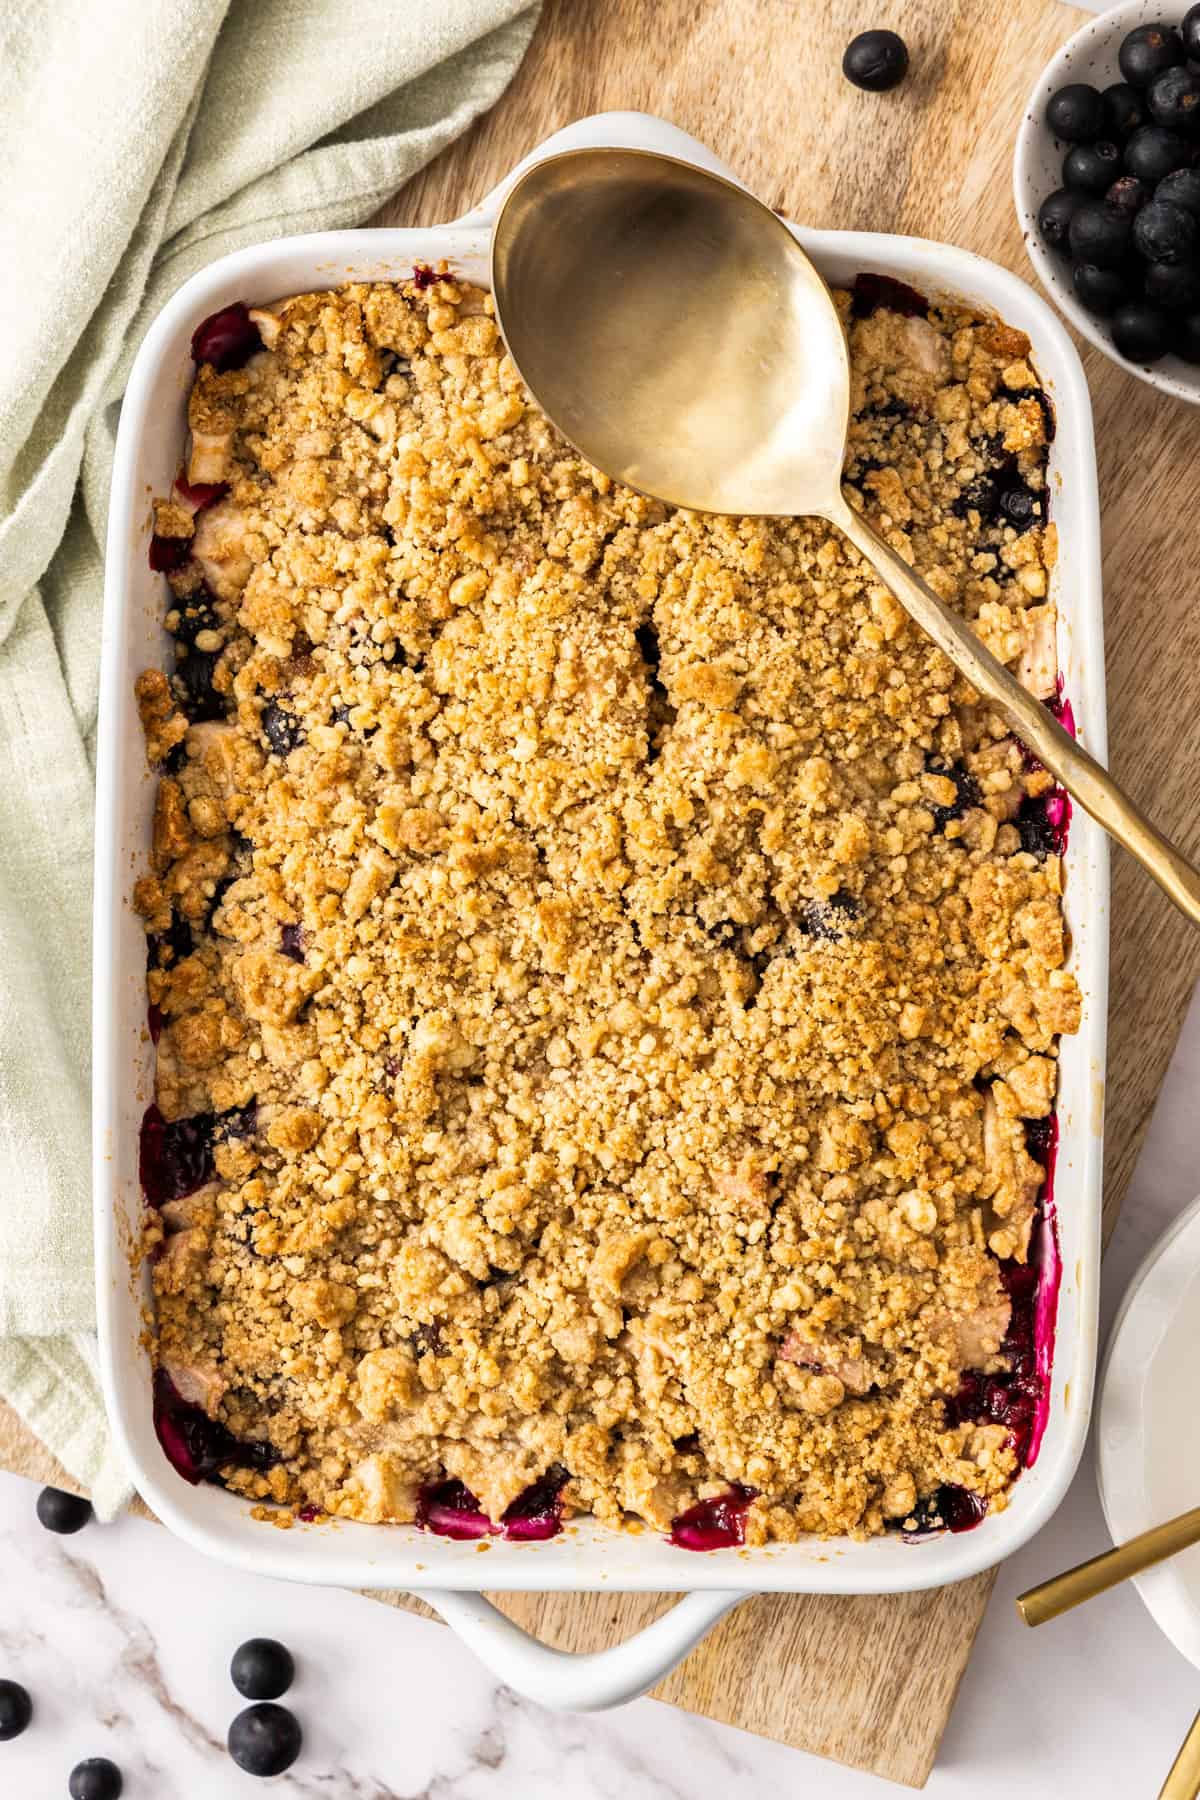 a white ceramic baking dish filled with an apple and blueberry crumble, topped with a gold serving spoon.